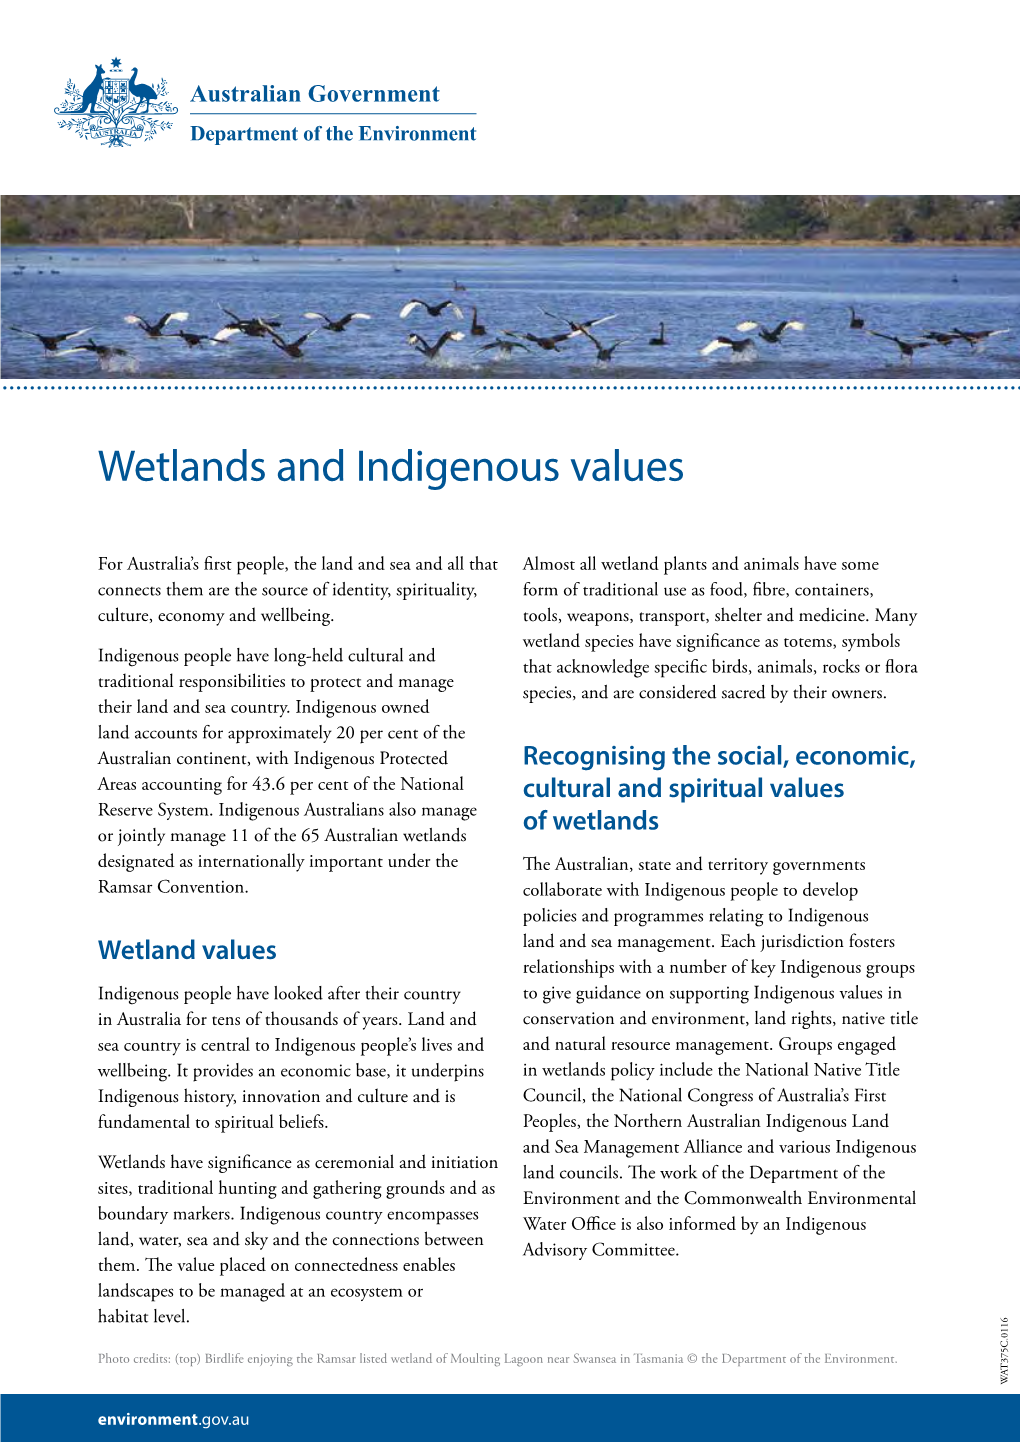 Wetlands and Indigenous Values